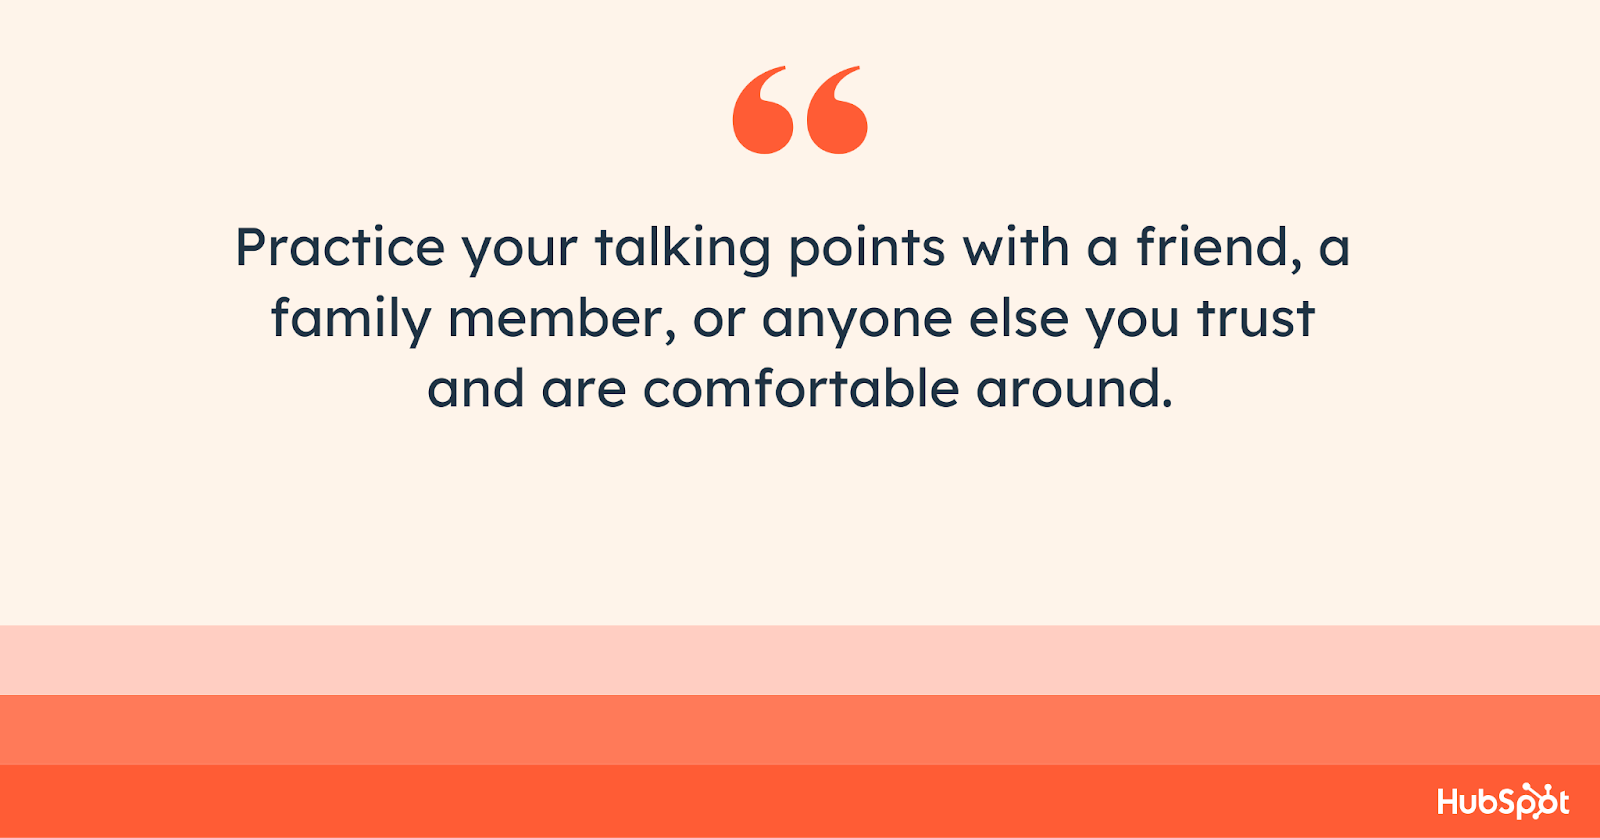 Practice your talking points with a friend, a  family member, or anyone you trust and are comfortable around.